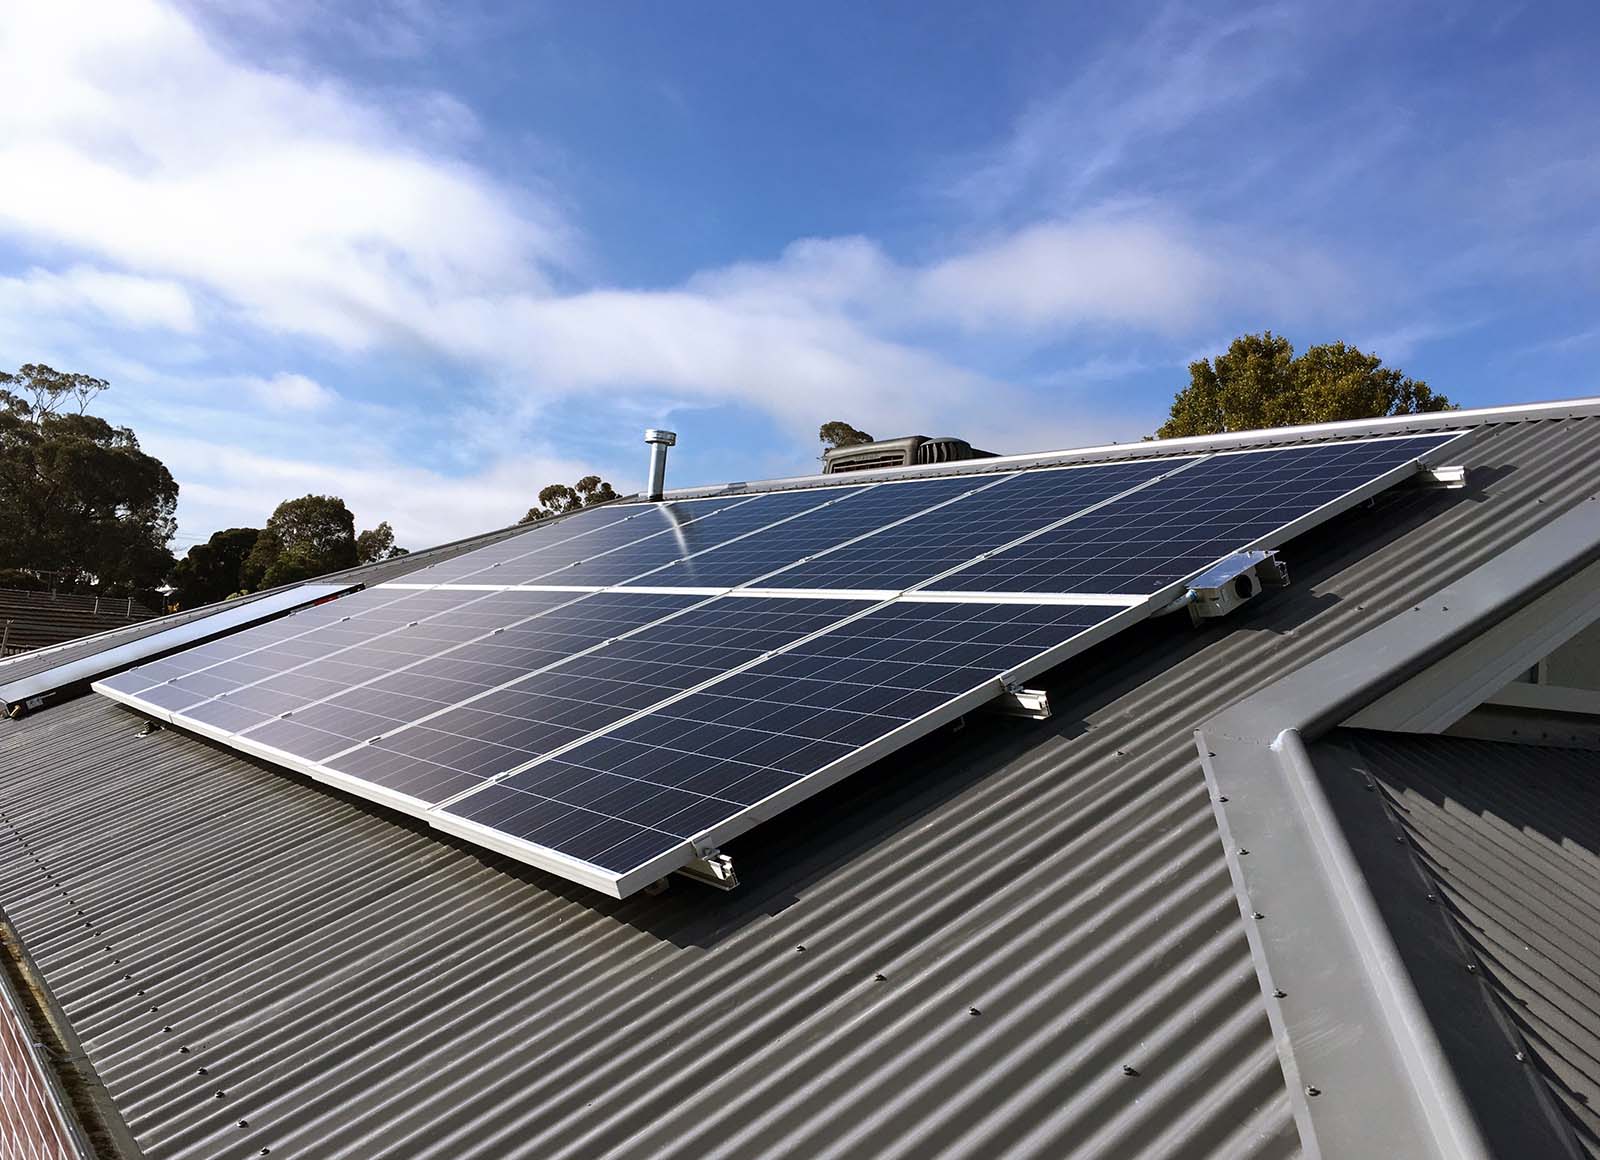 Why Bird Control For Solar Panels Is Necessary